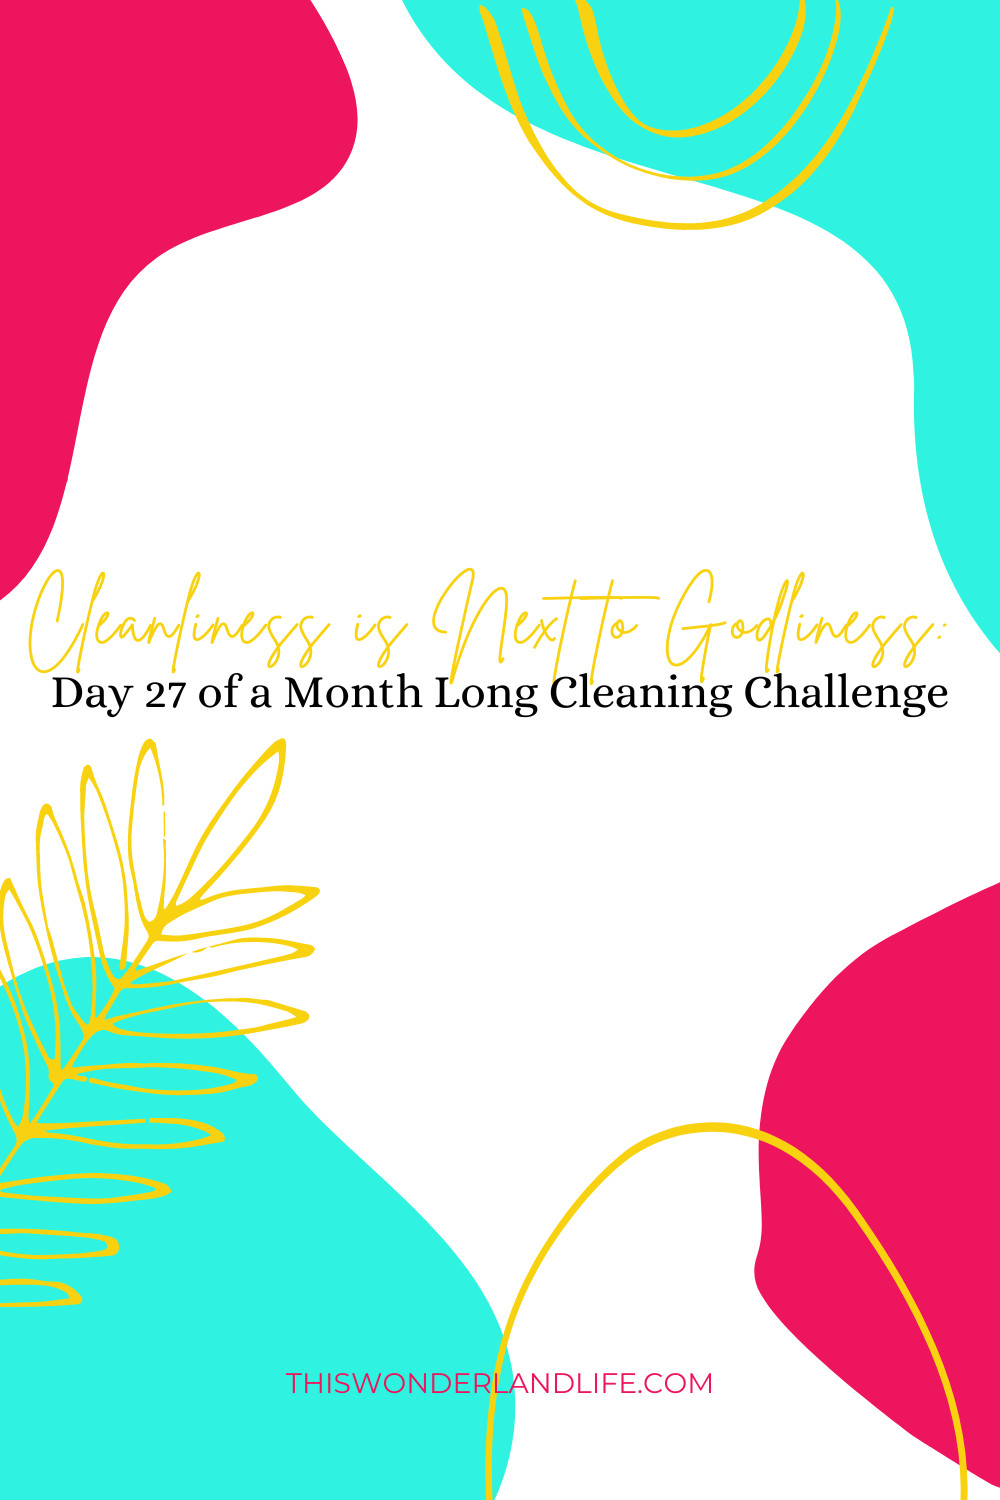 Cleanliness is Next to Godliness: Day 27 of a Month Long Cleaning Challenge